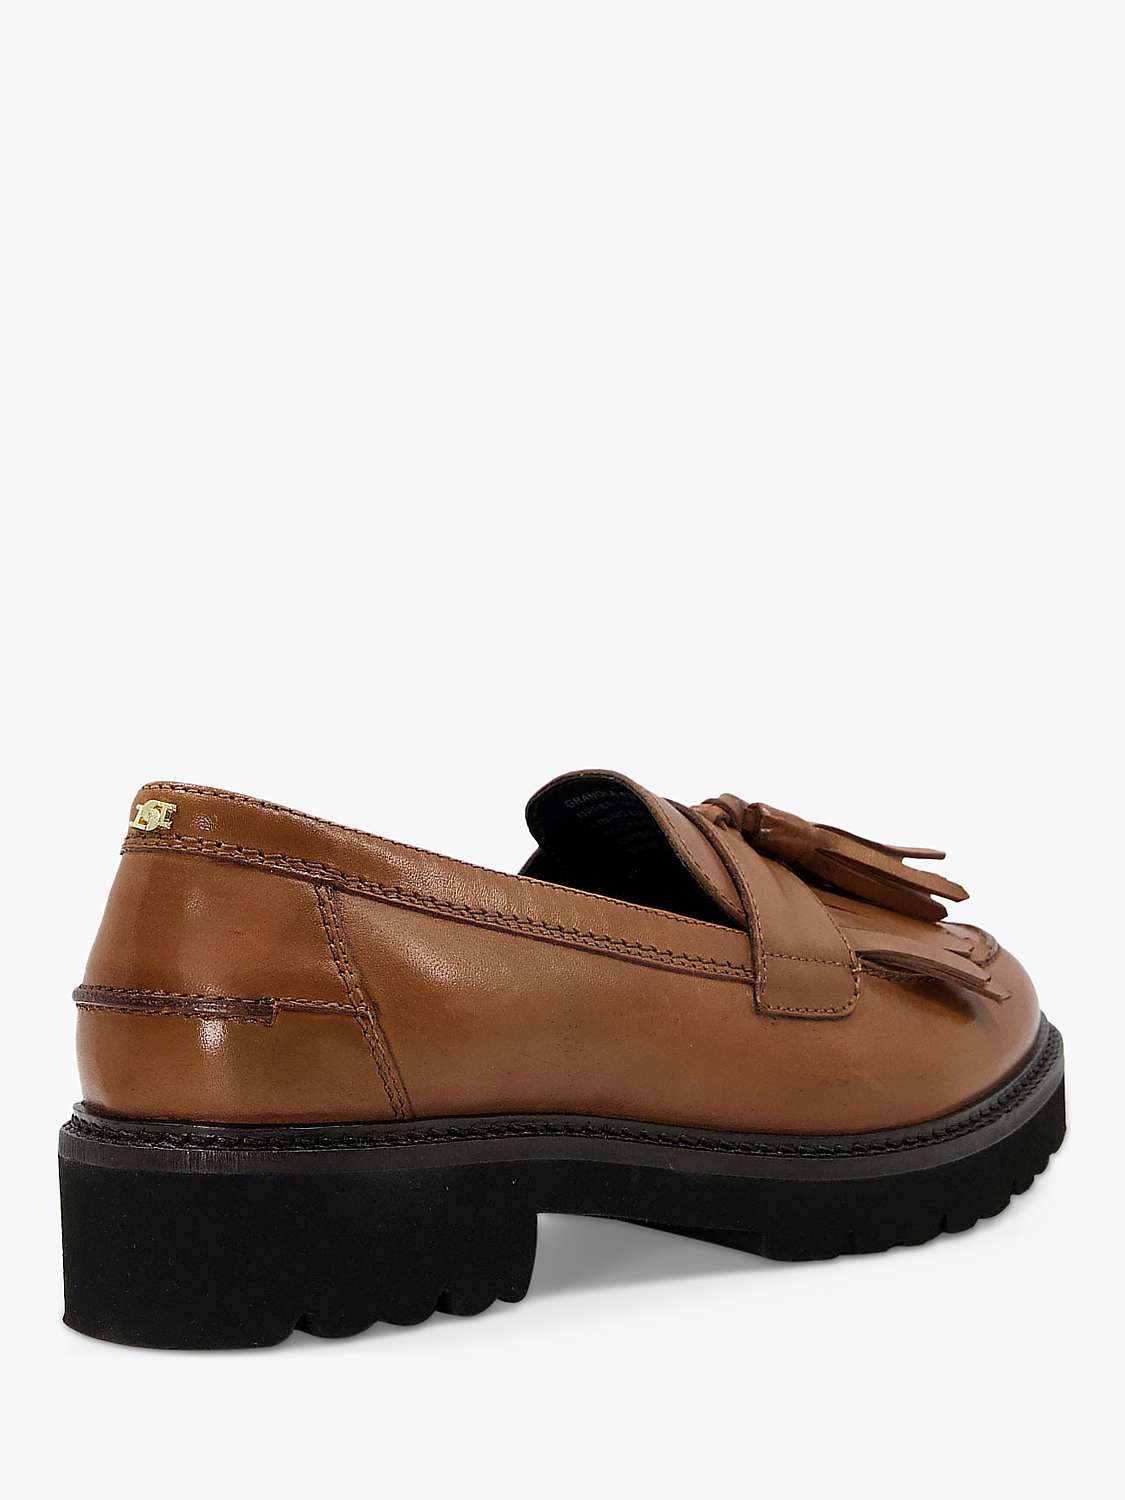 Dune Guardian Leather Loafers, Tan at John Lewis & Partners